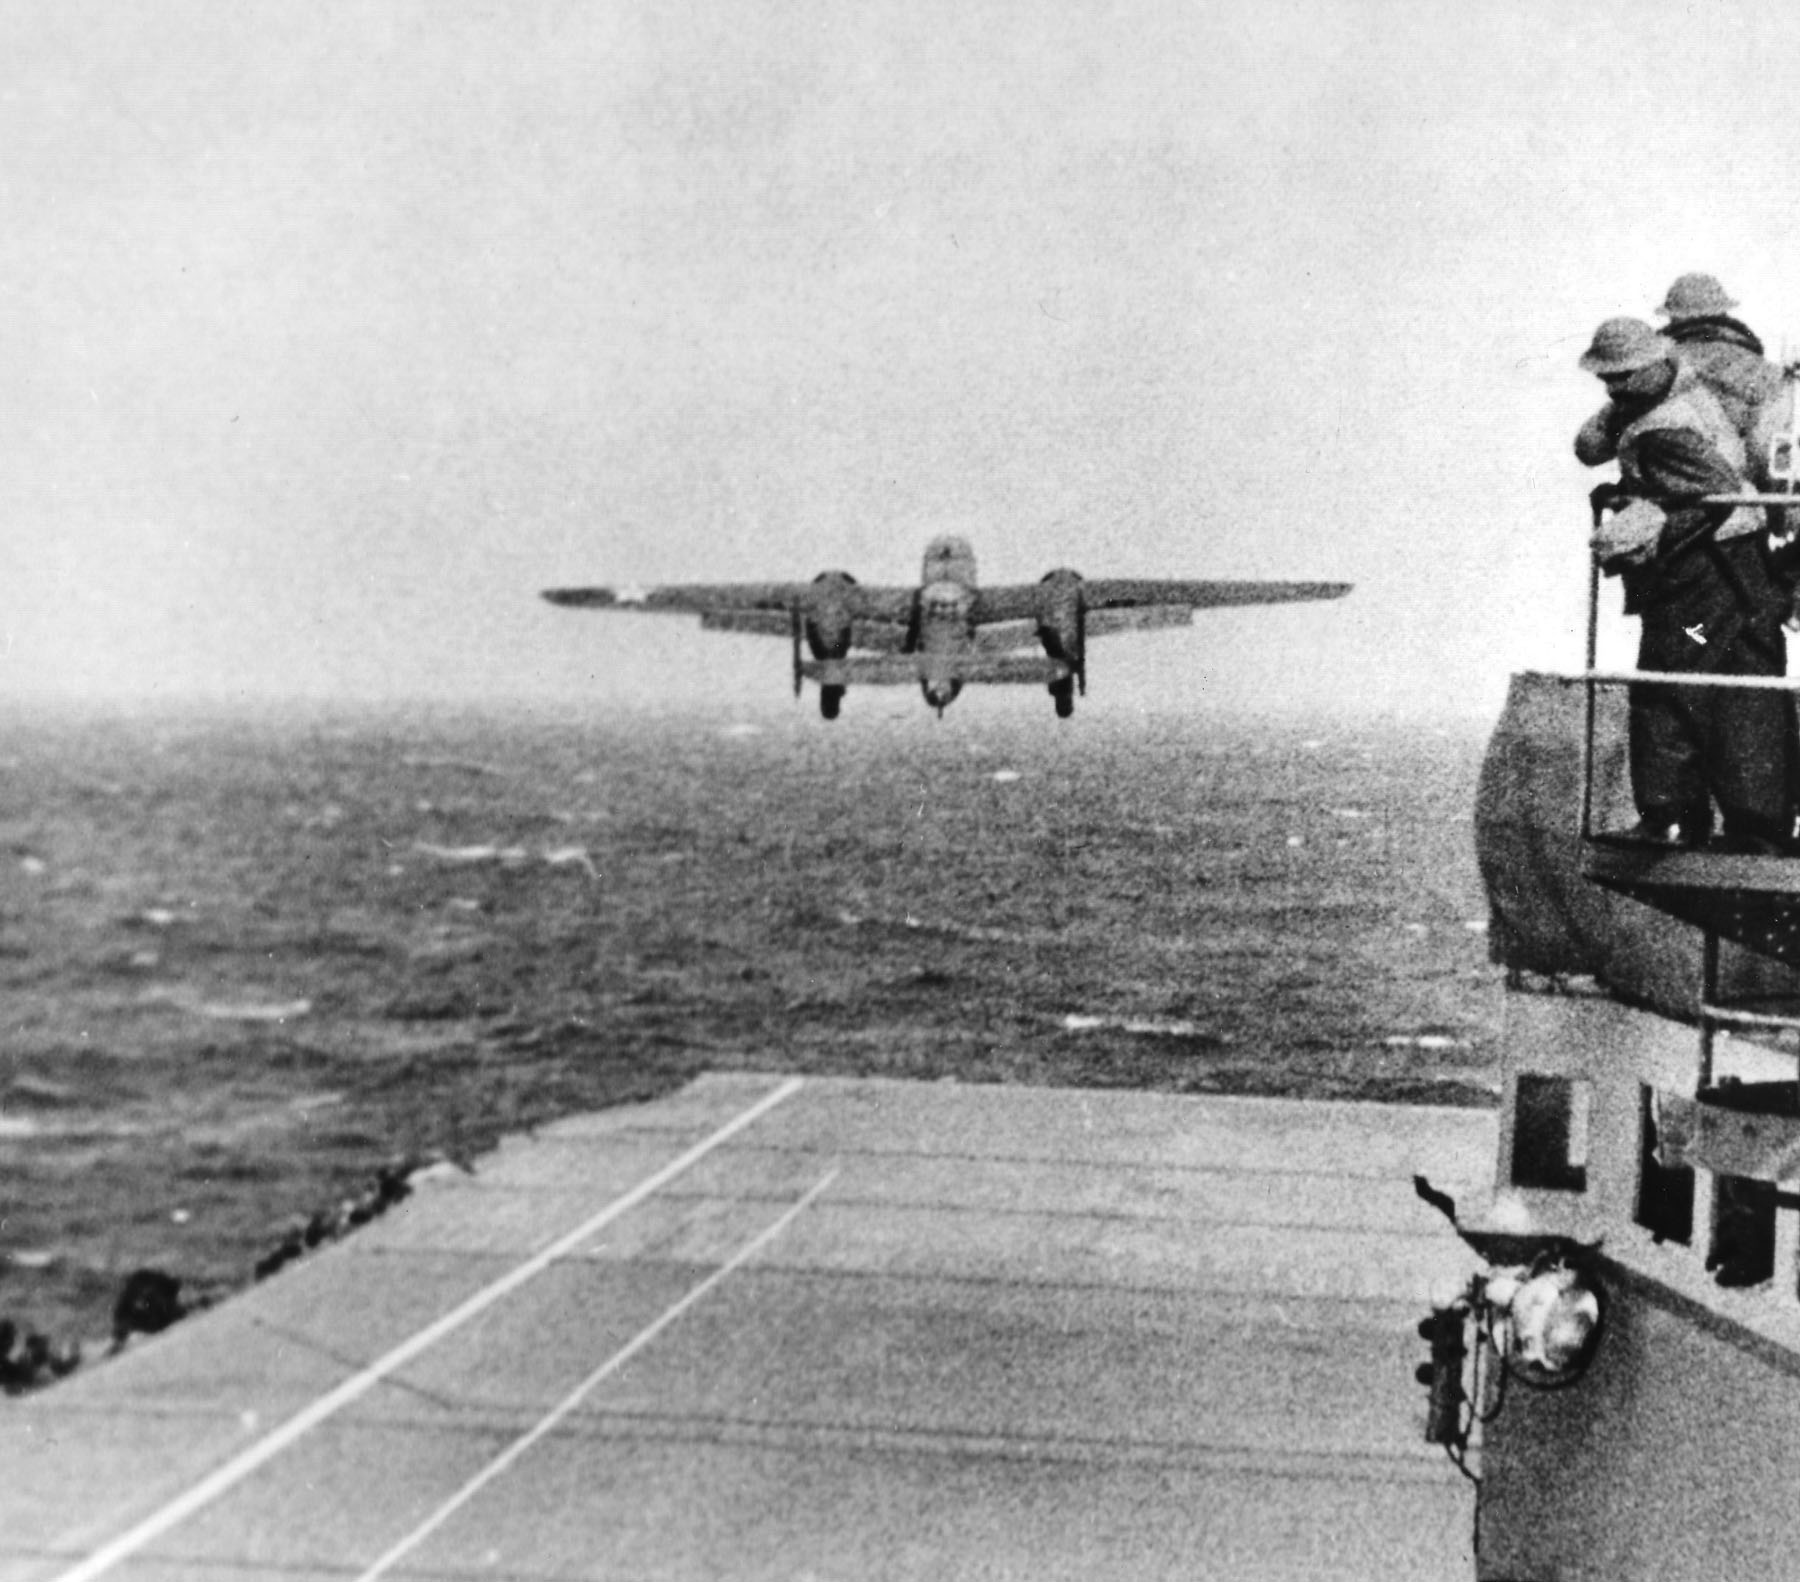 Taken from the deck of the U.S.S. Hornet (CU-8) of a B-25 bomber on its way to take part in the first U.S. air raid on Japan.